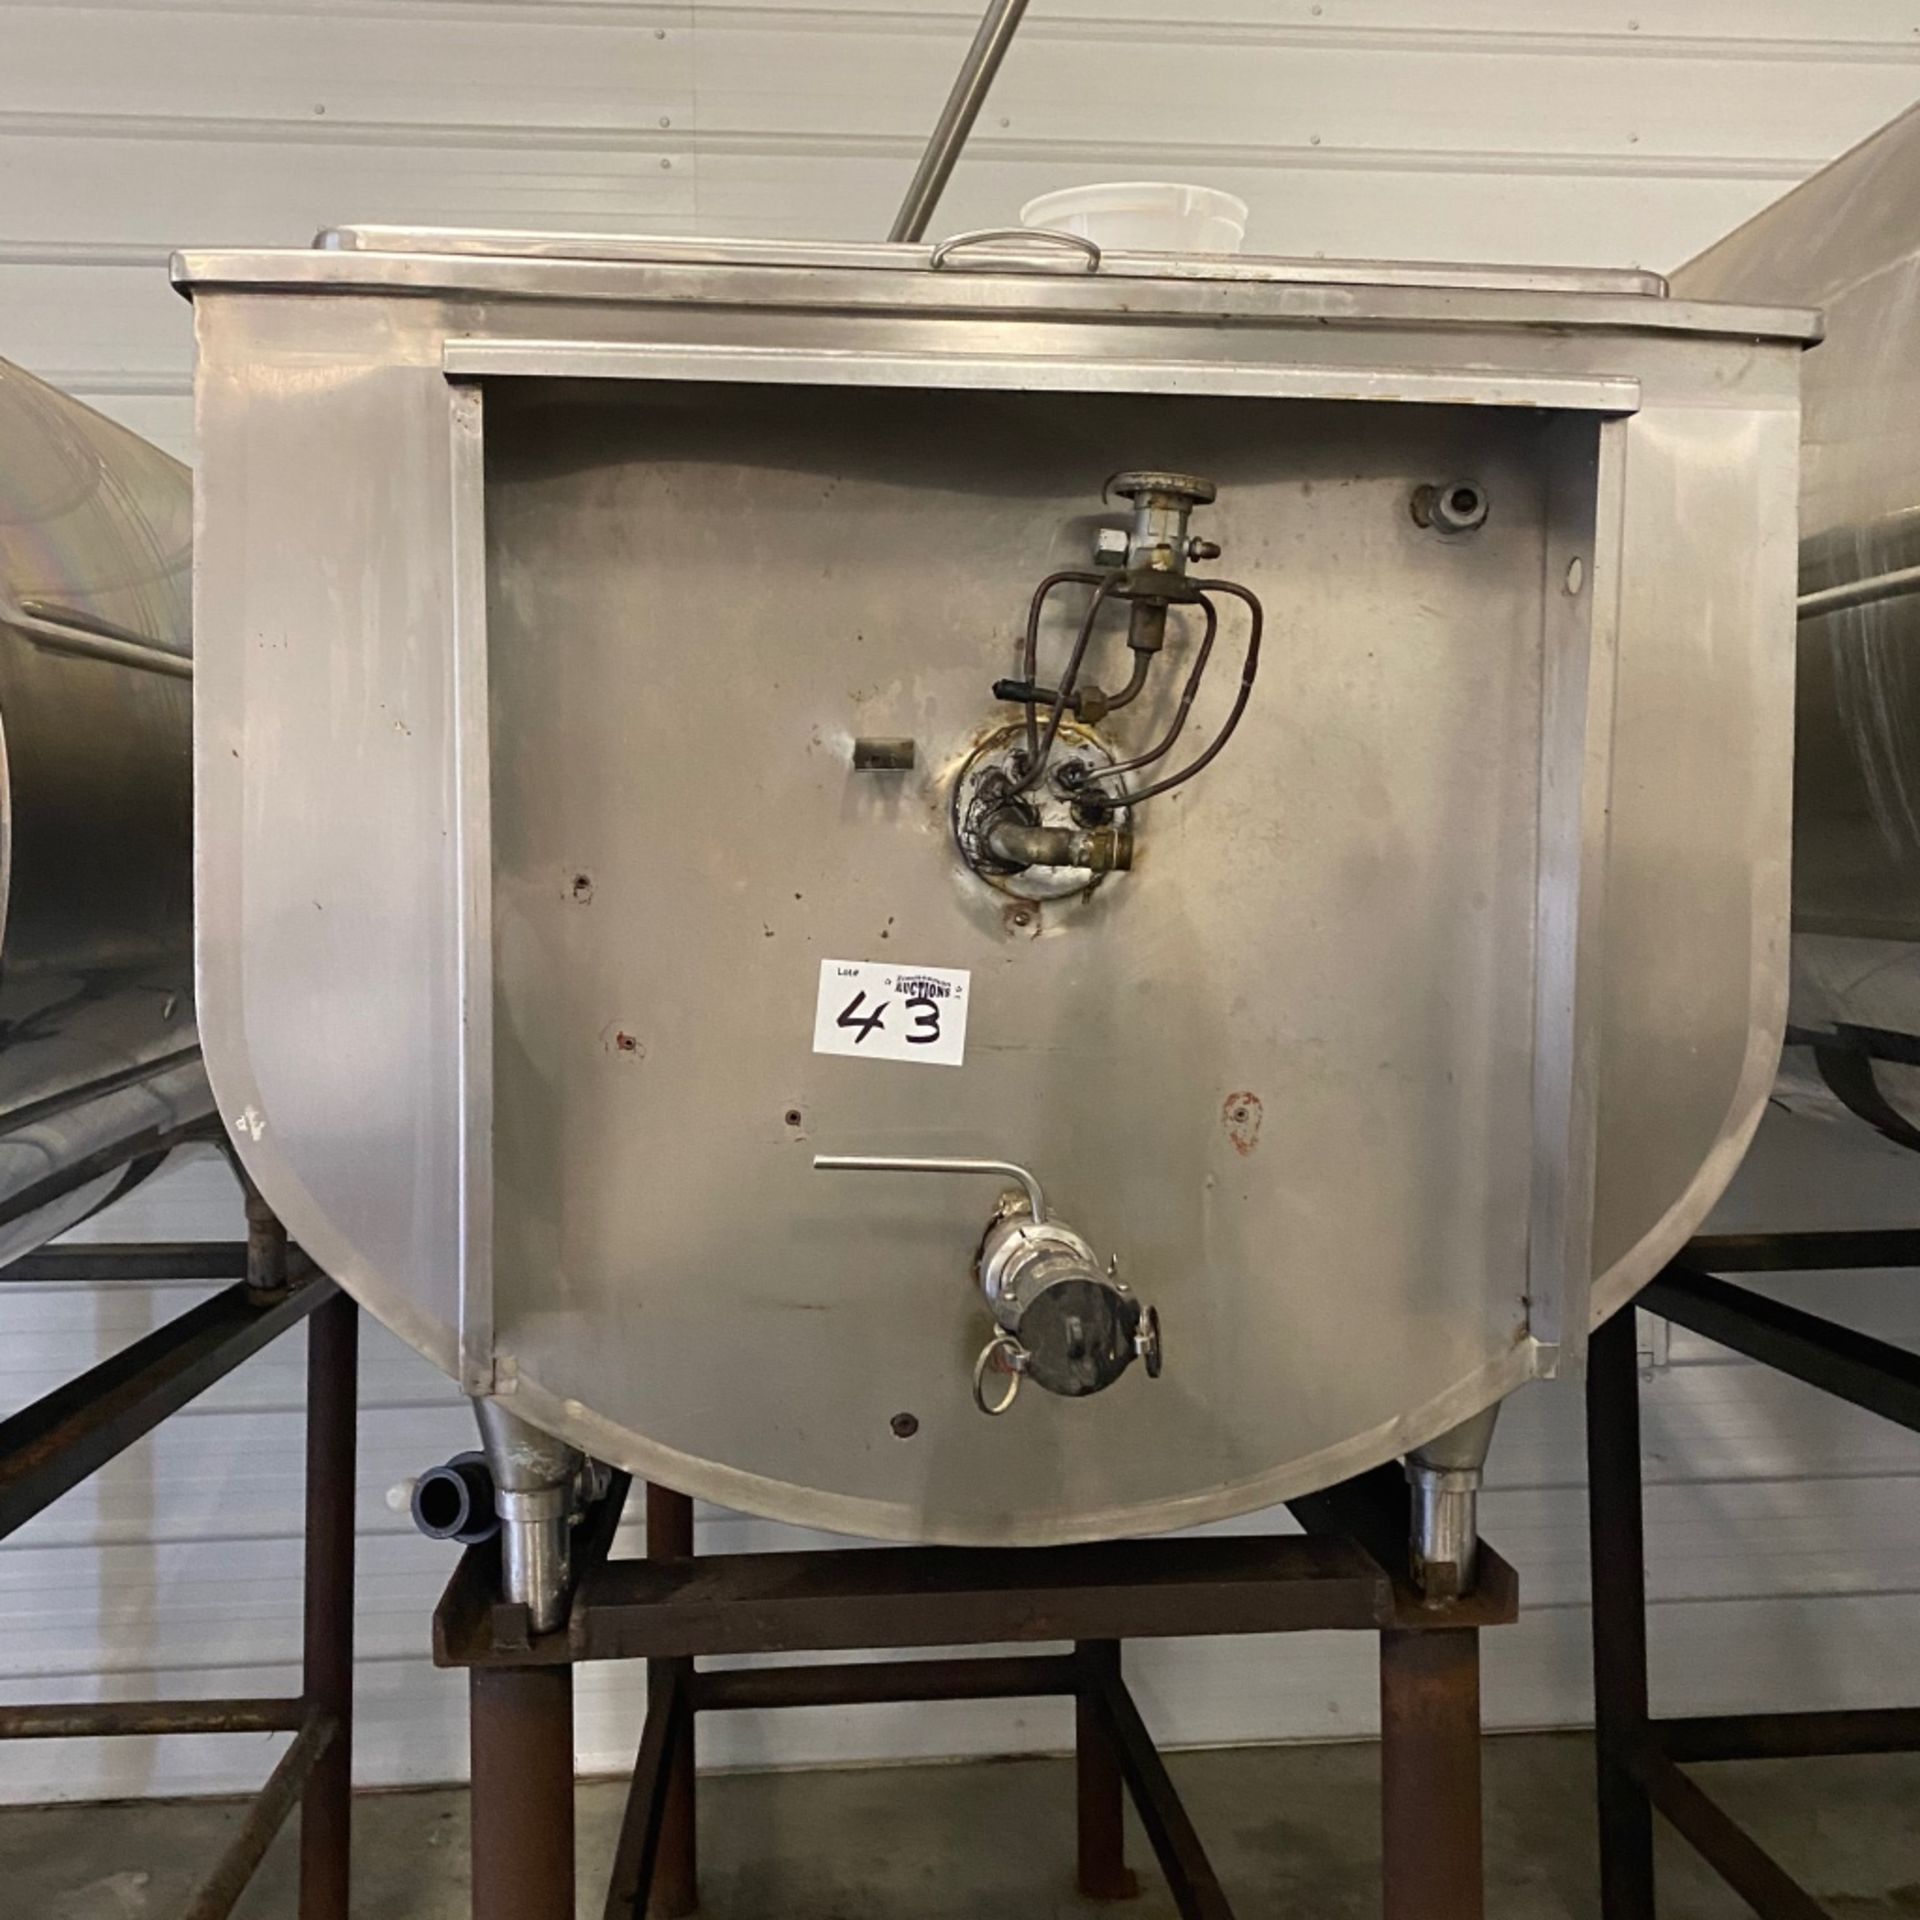 Stainless Steel Bulk Tank with Stand, 350 Gallons - Image 2 of 2